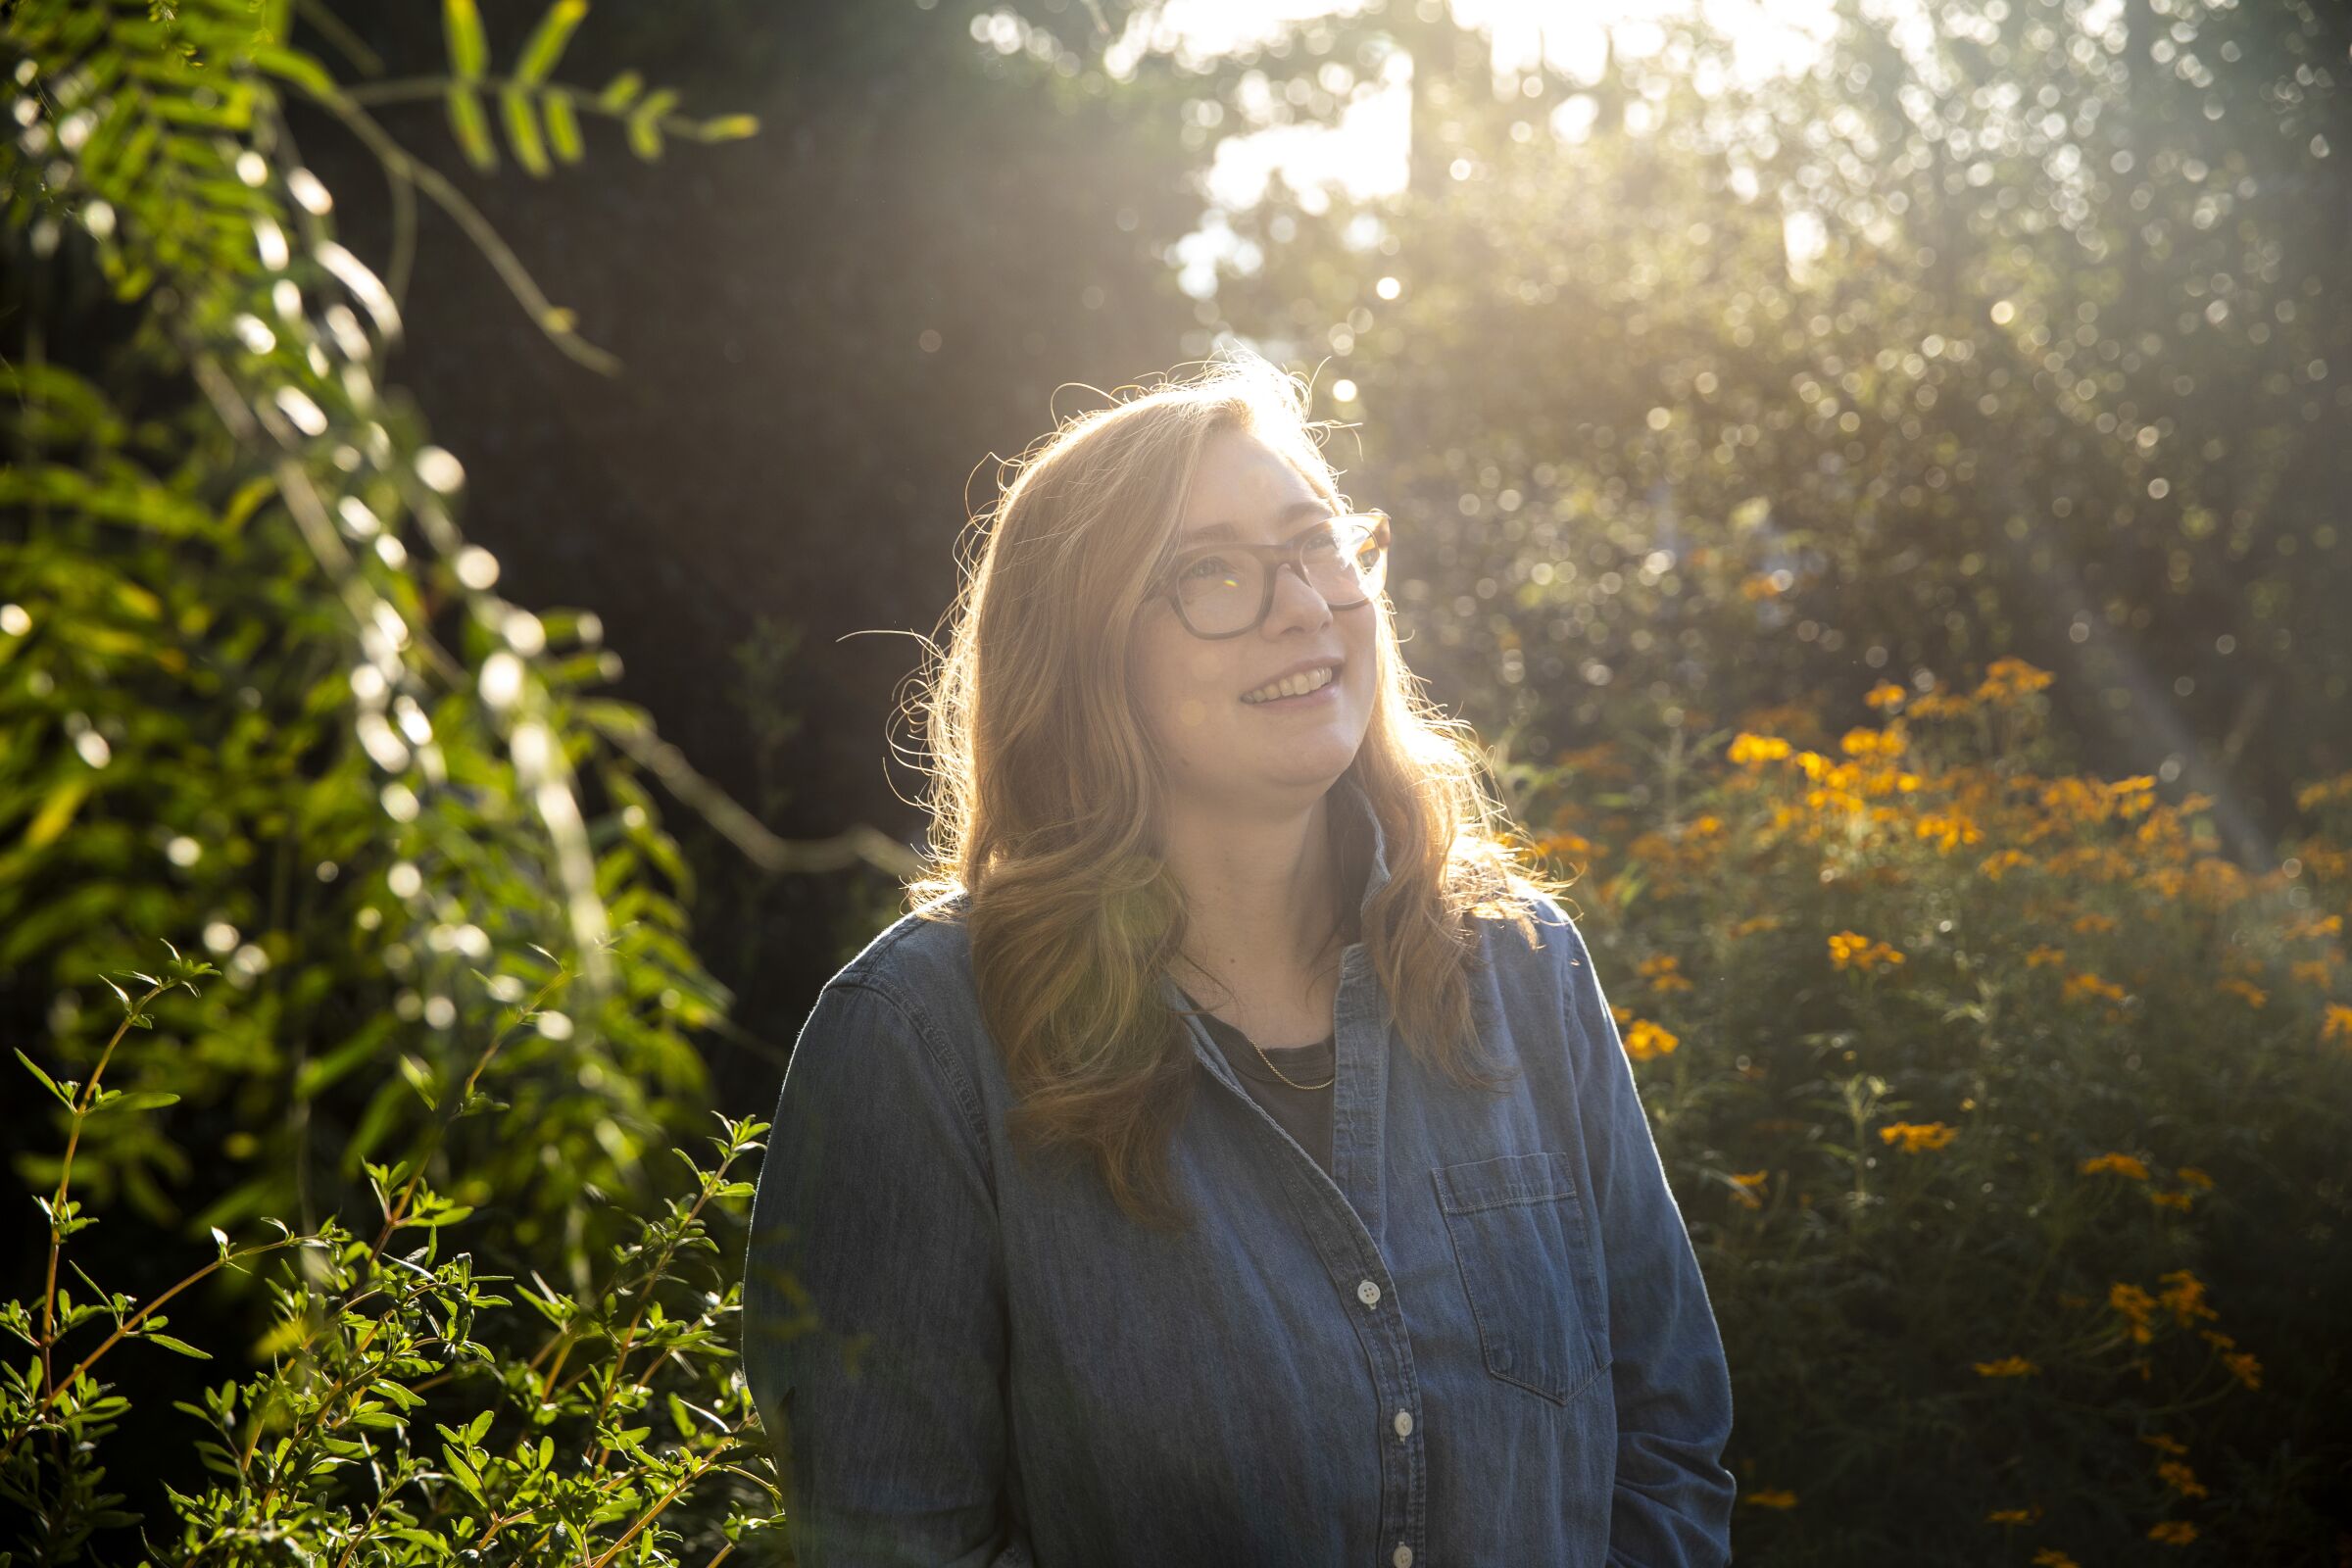 A woman in glasses and denim shirt illuminated by soft sunlight